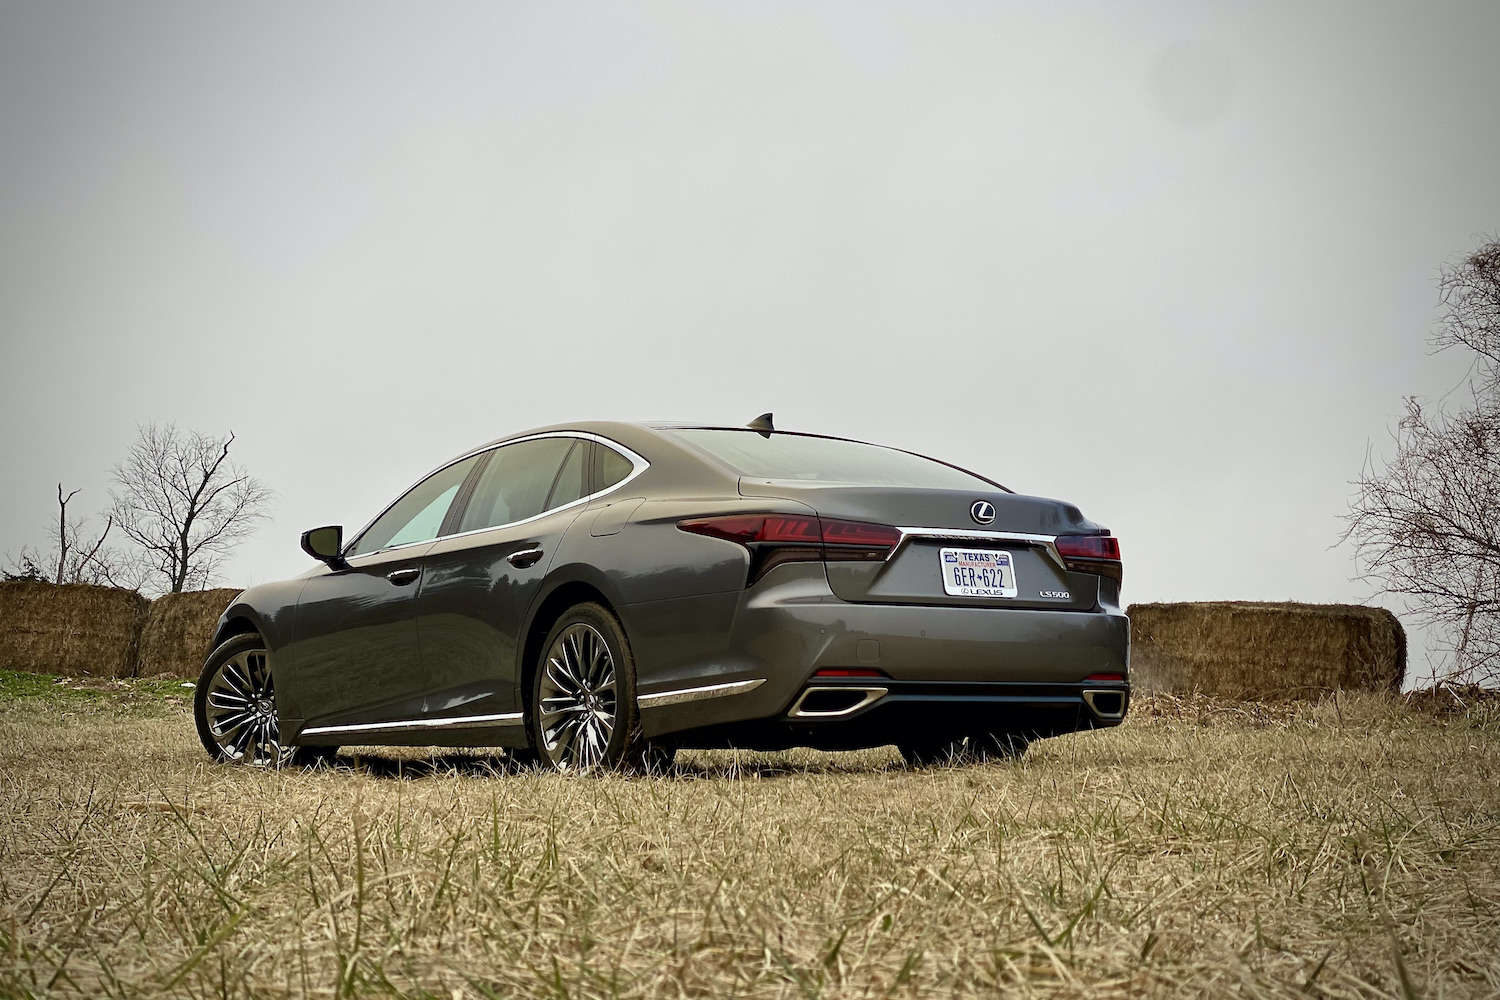 The rear end of the 2021 Lexus LS500 from driver's side in a grassy field in front of hay bales.